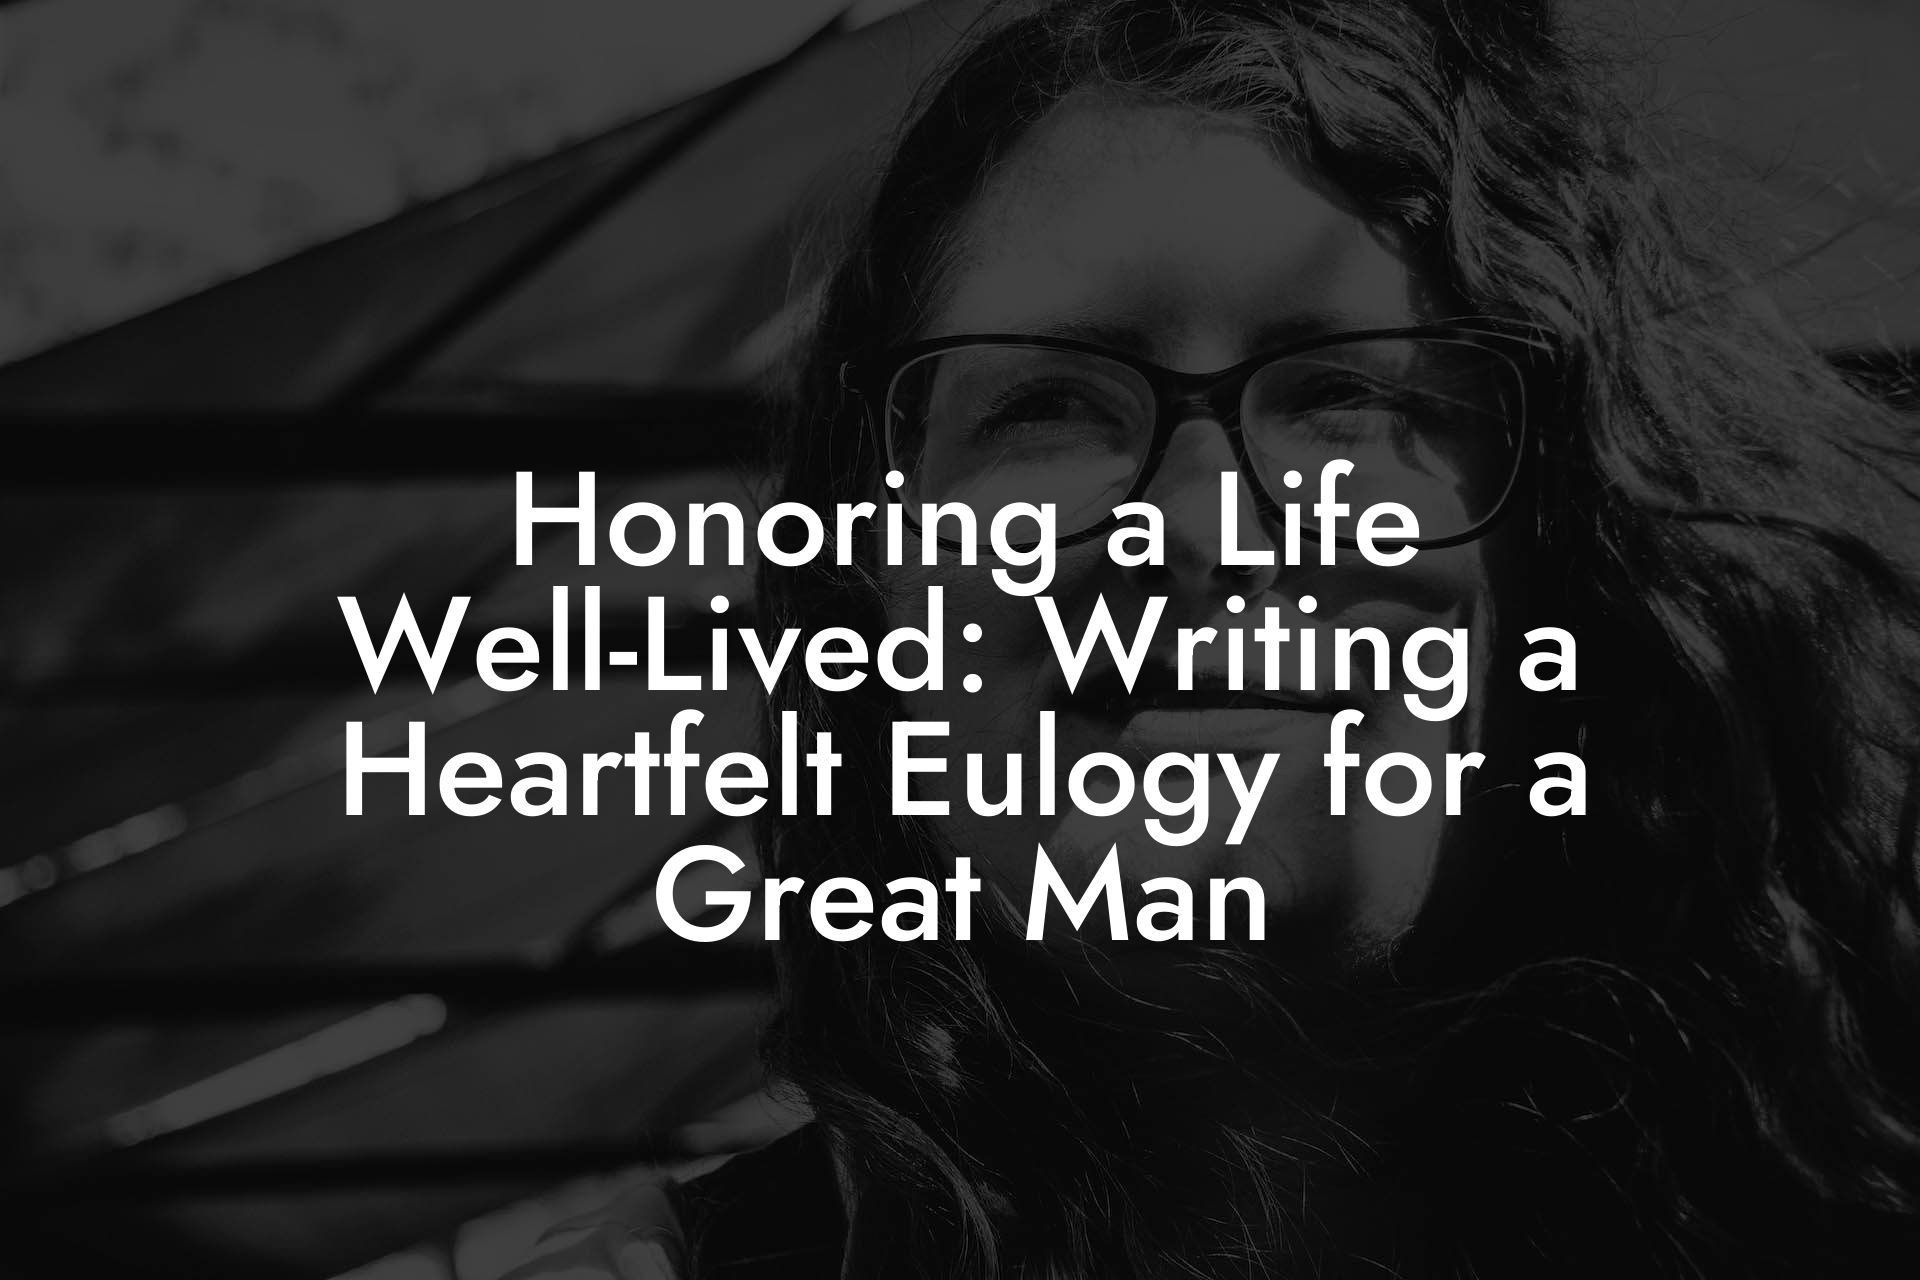 Honoring a Life Well-Lived: Writing a Heartfelt Eulogy for a Great Man